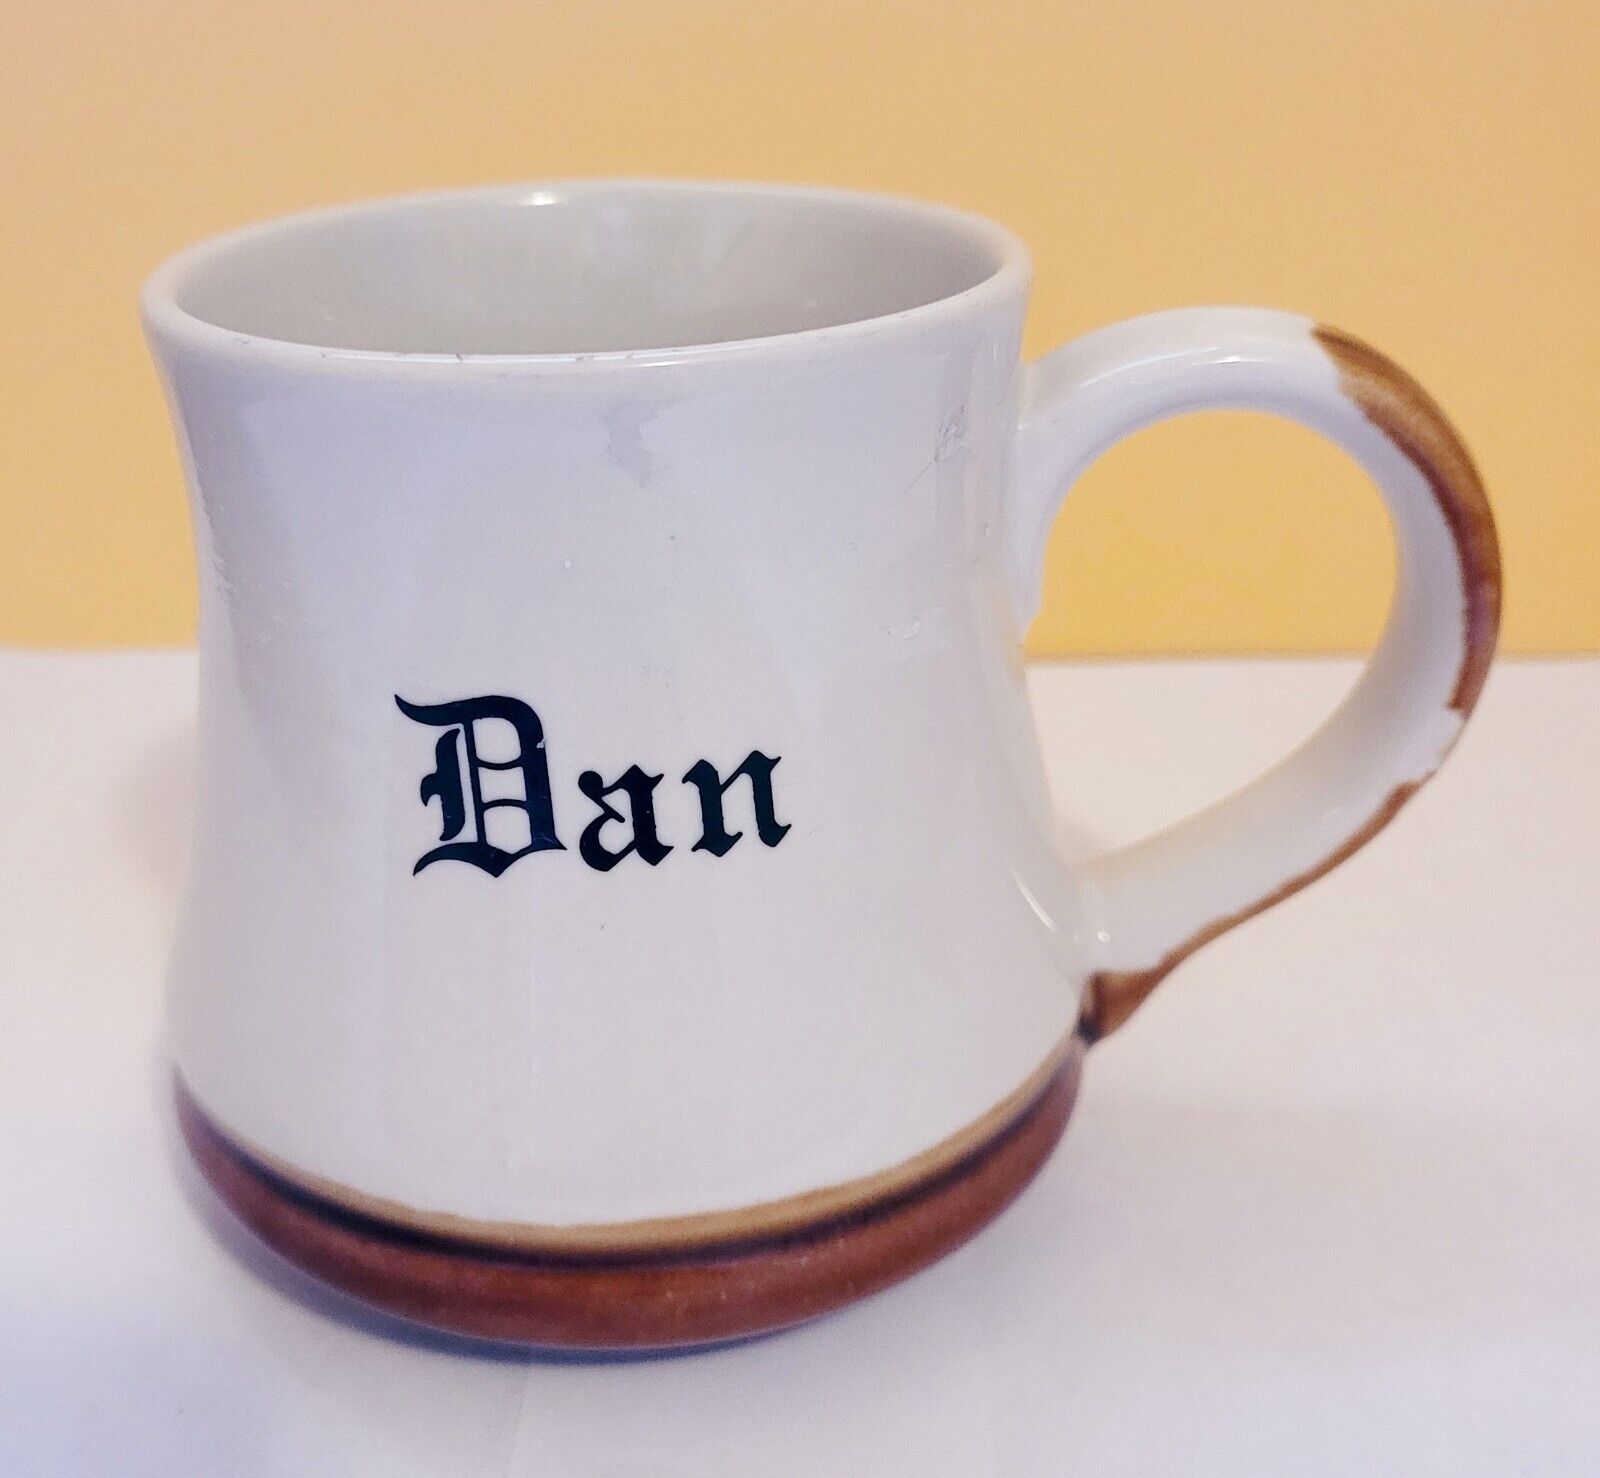 Dan Coffee Cup Mug Customized Personalized with Name Vintage 